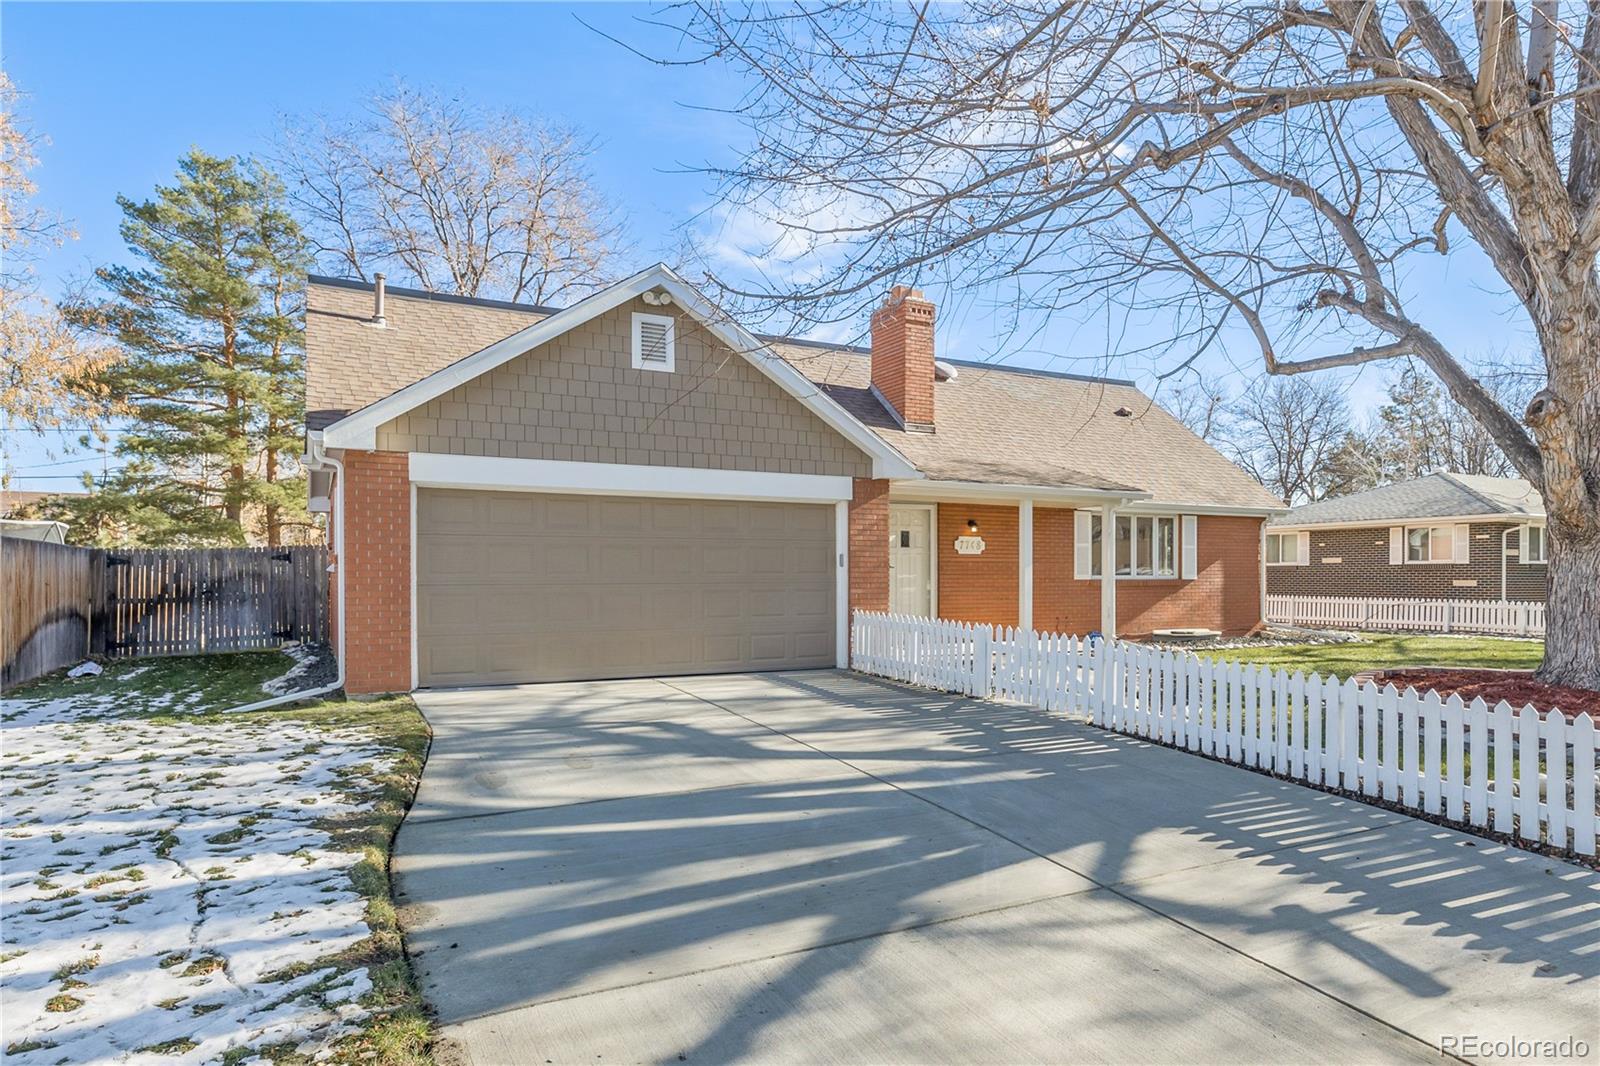 7748  newman street, Arvada sold home. Closed on 2024-01-23 for $785,000.